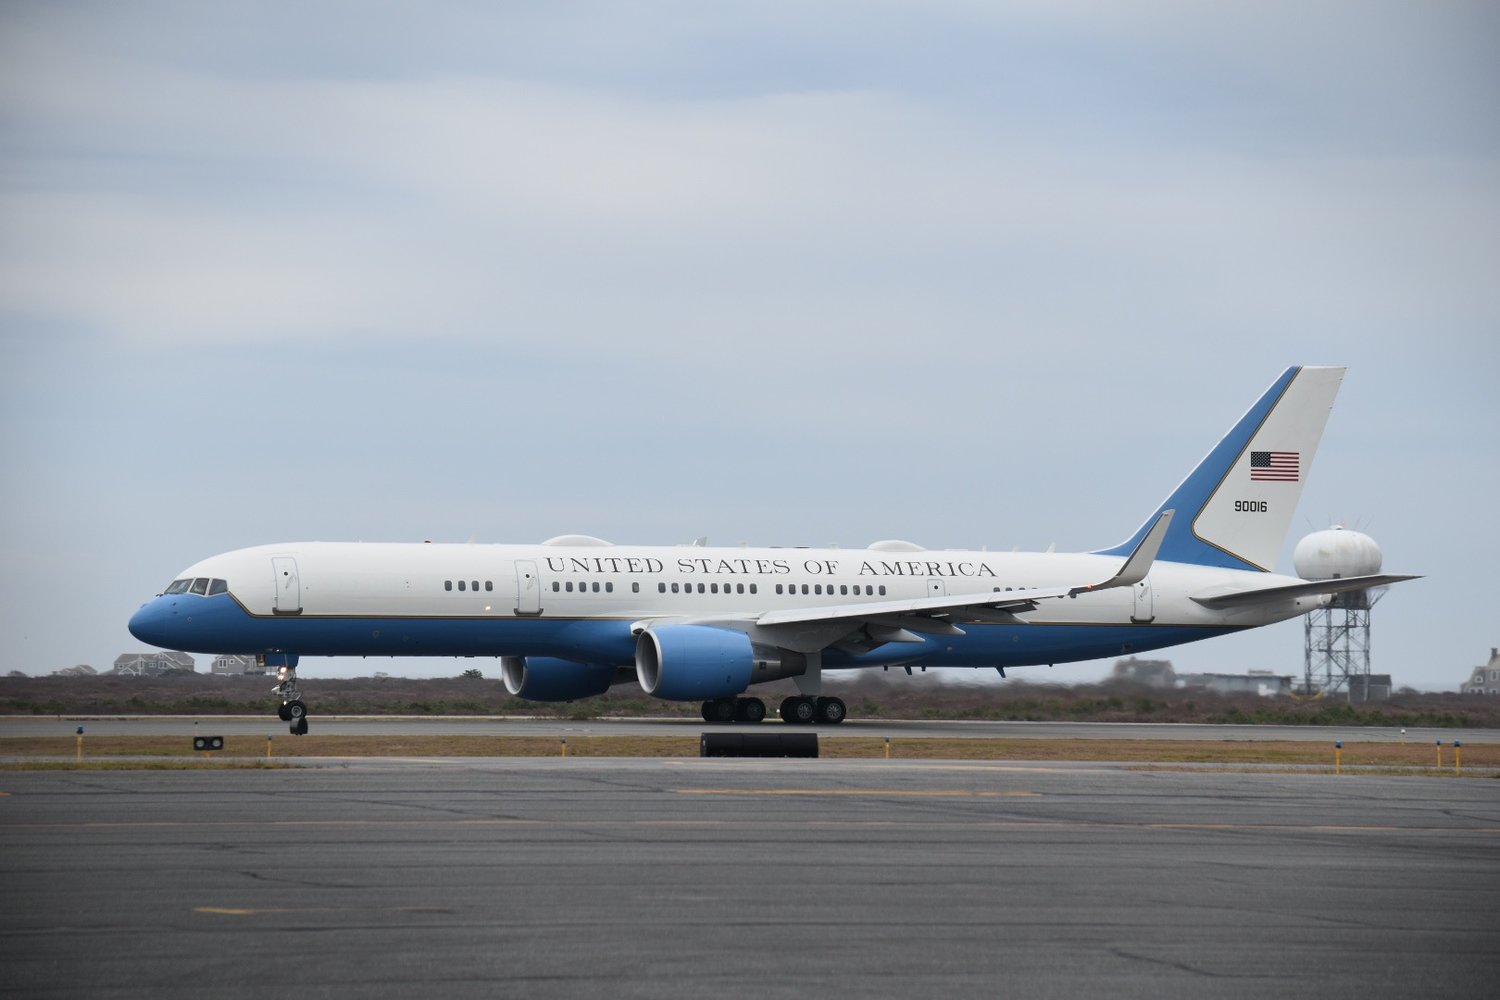 Air Force One on the tarmac at Nantucket Memorial Airport Sunday prior to the first family's return to Washington, D.C.